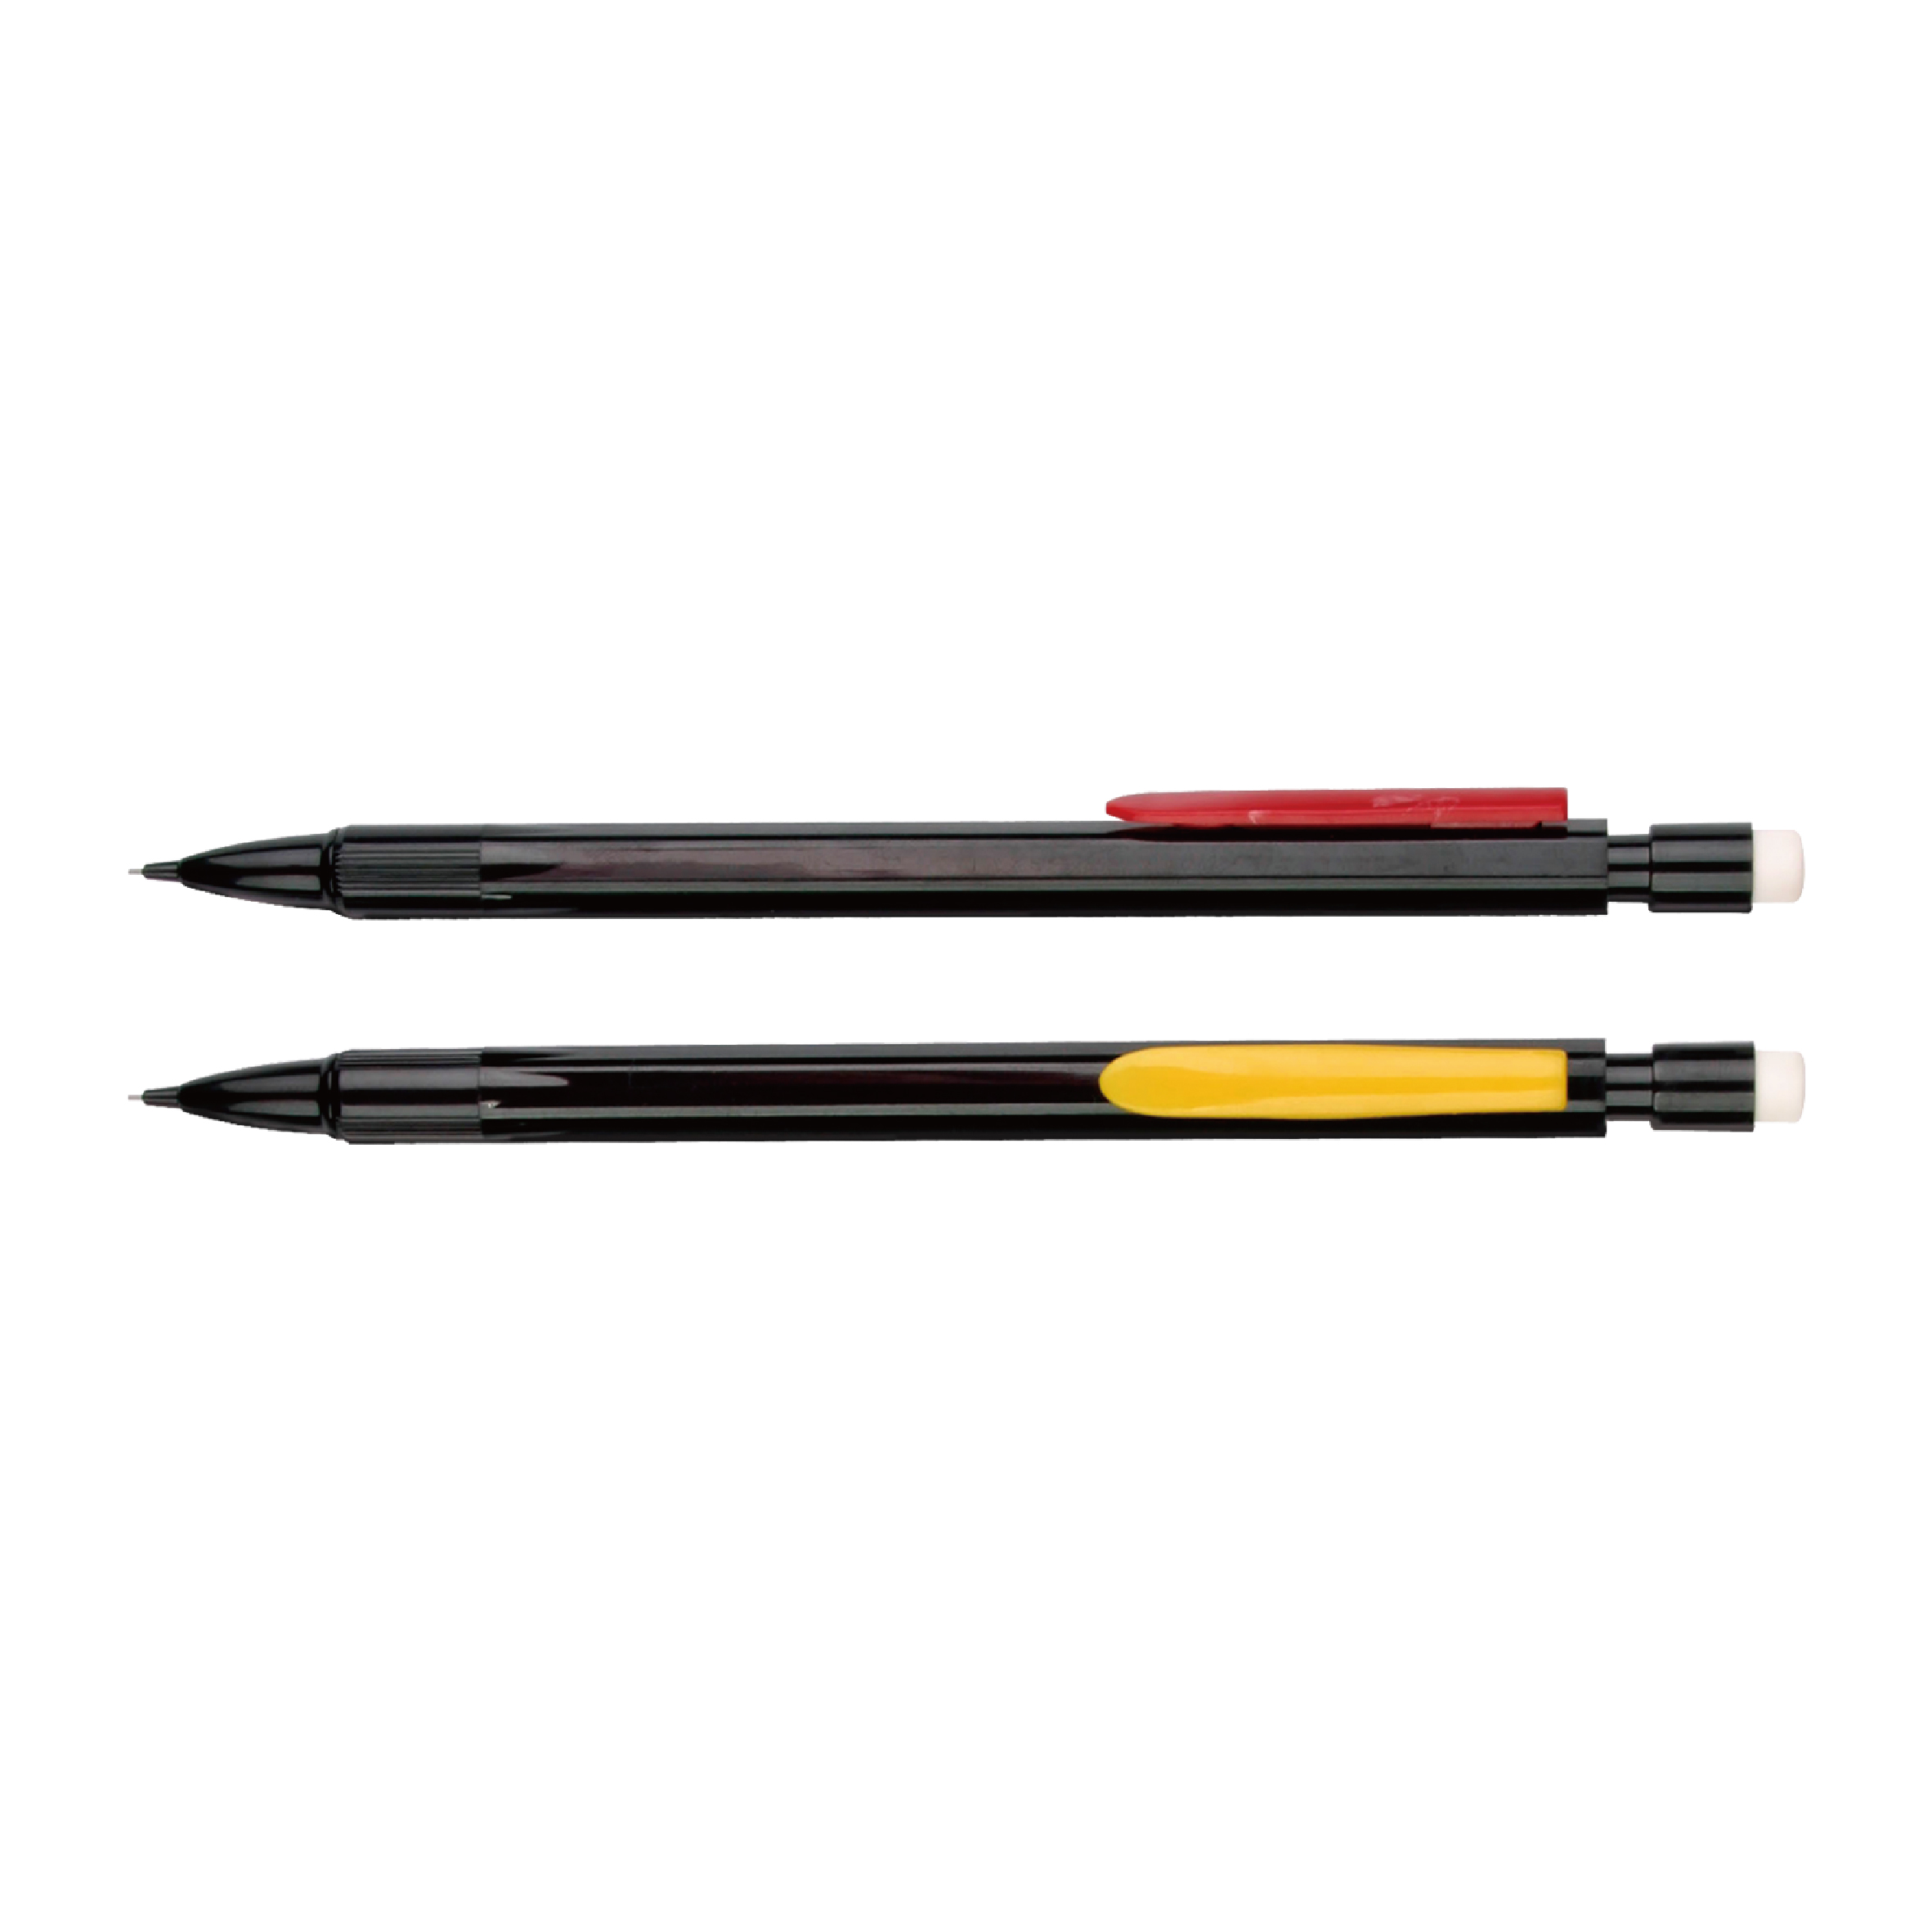 HB&2B Lead Simple Design Mechanical Pencil with Eraser End